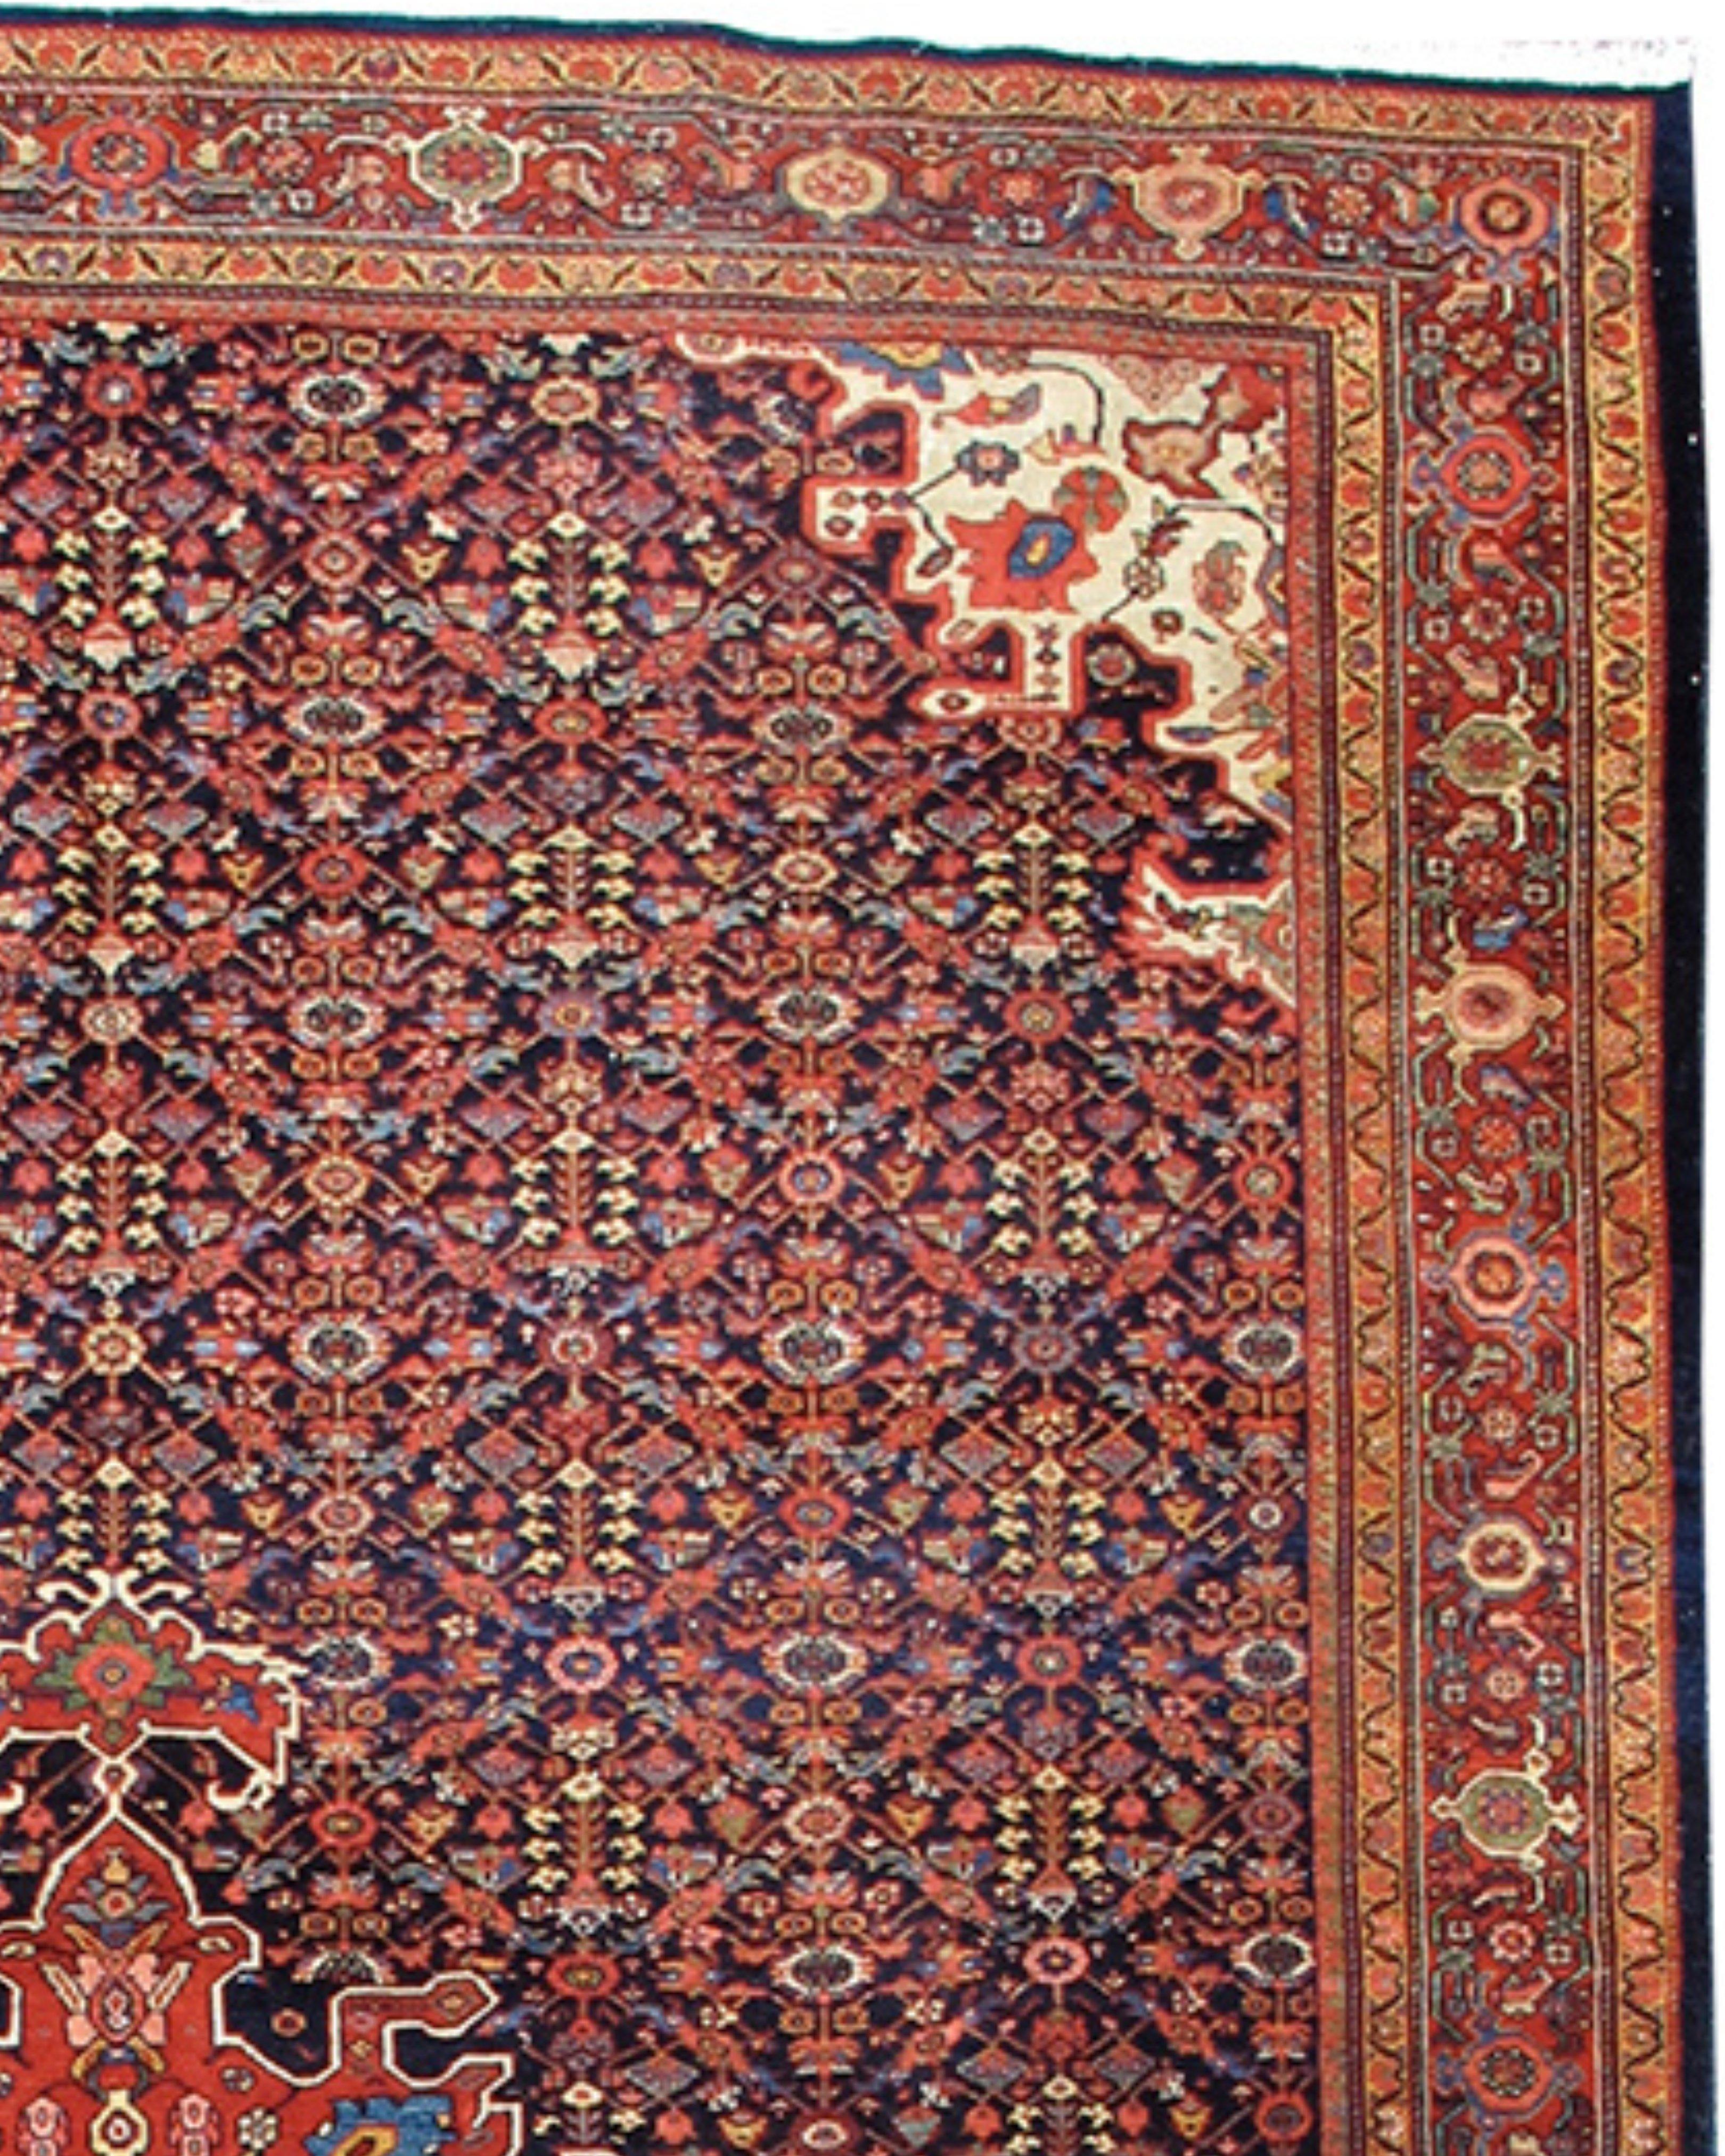 Hand-Woven Antique Fereghan Sarouk Rug, Late 19th Century For Sale